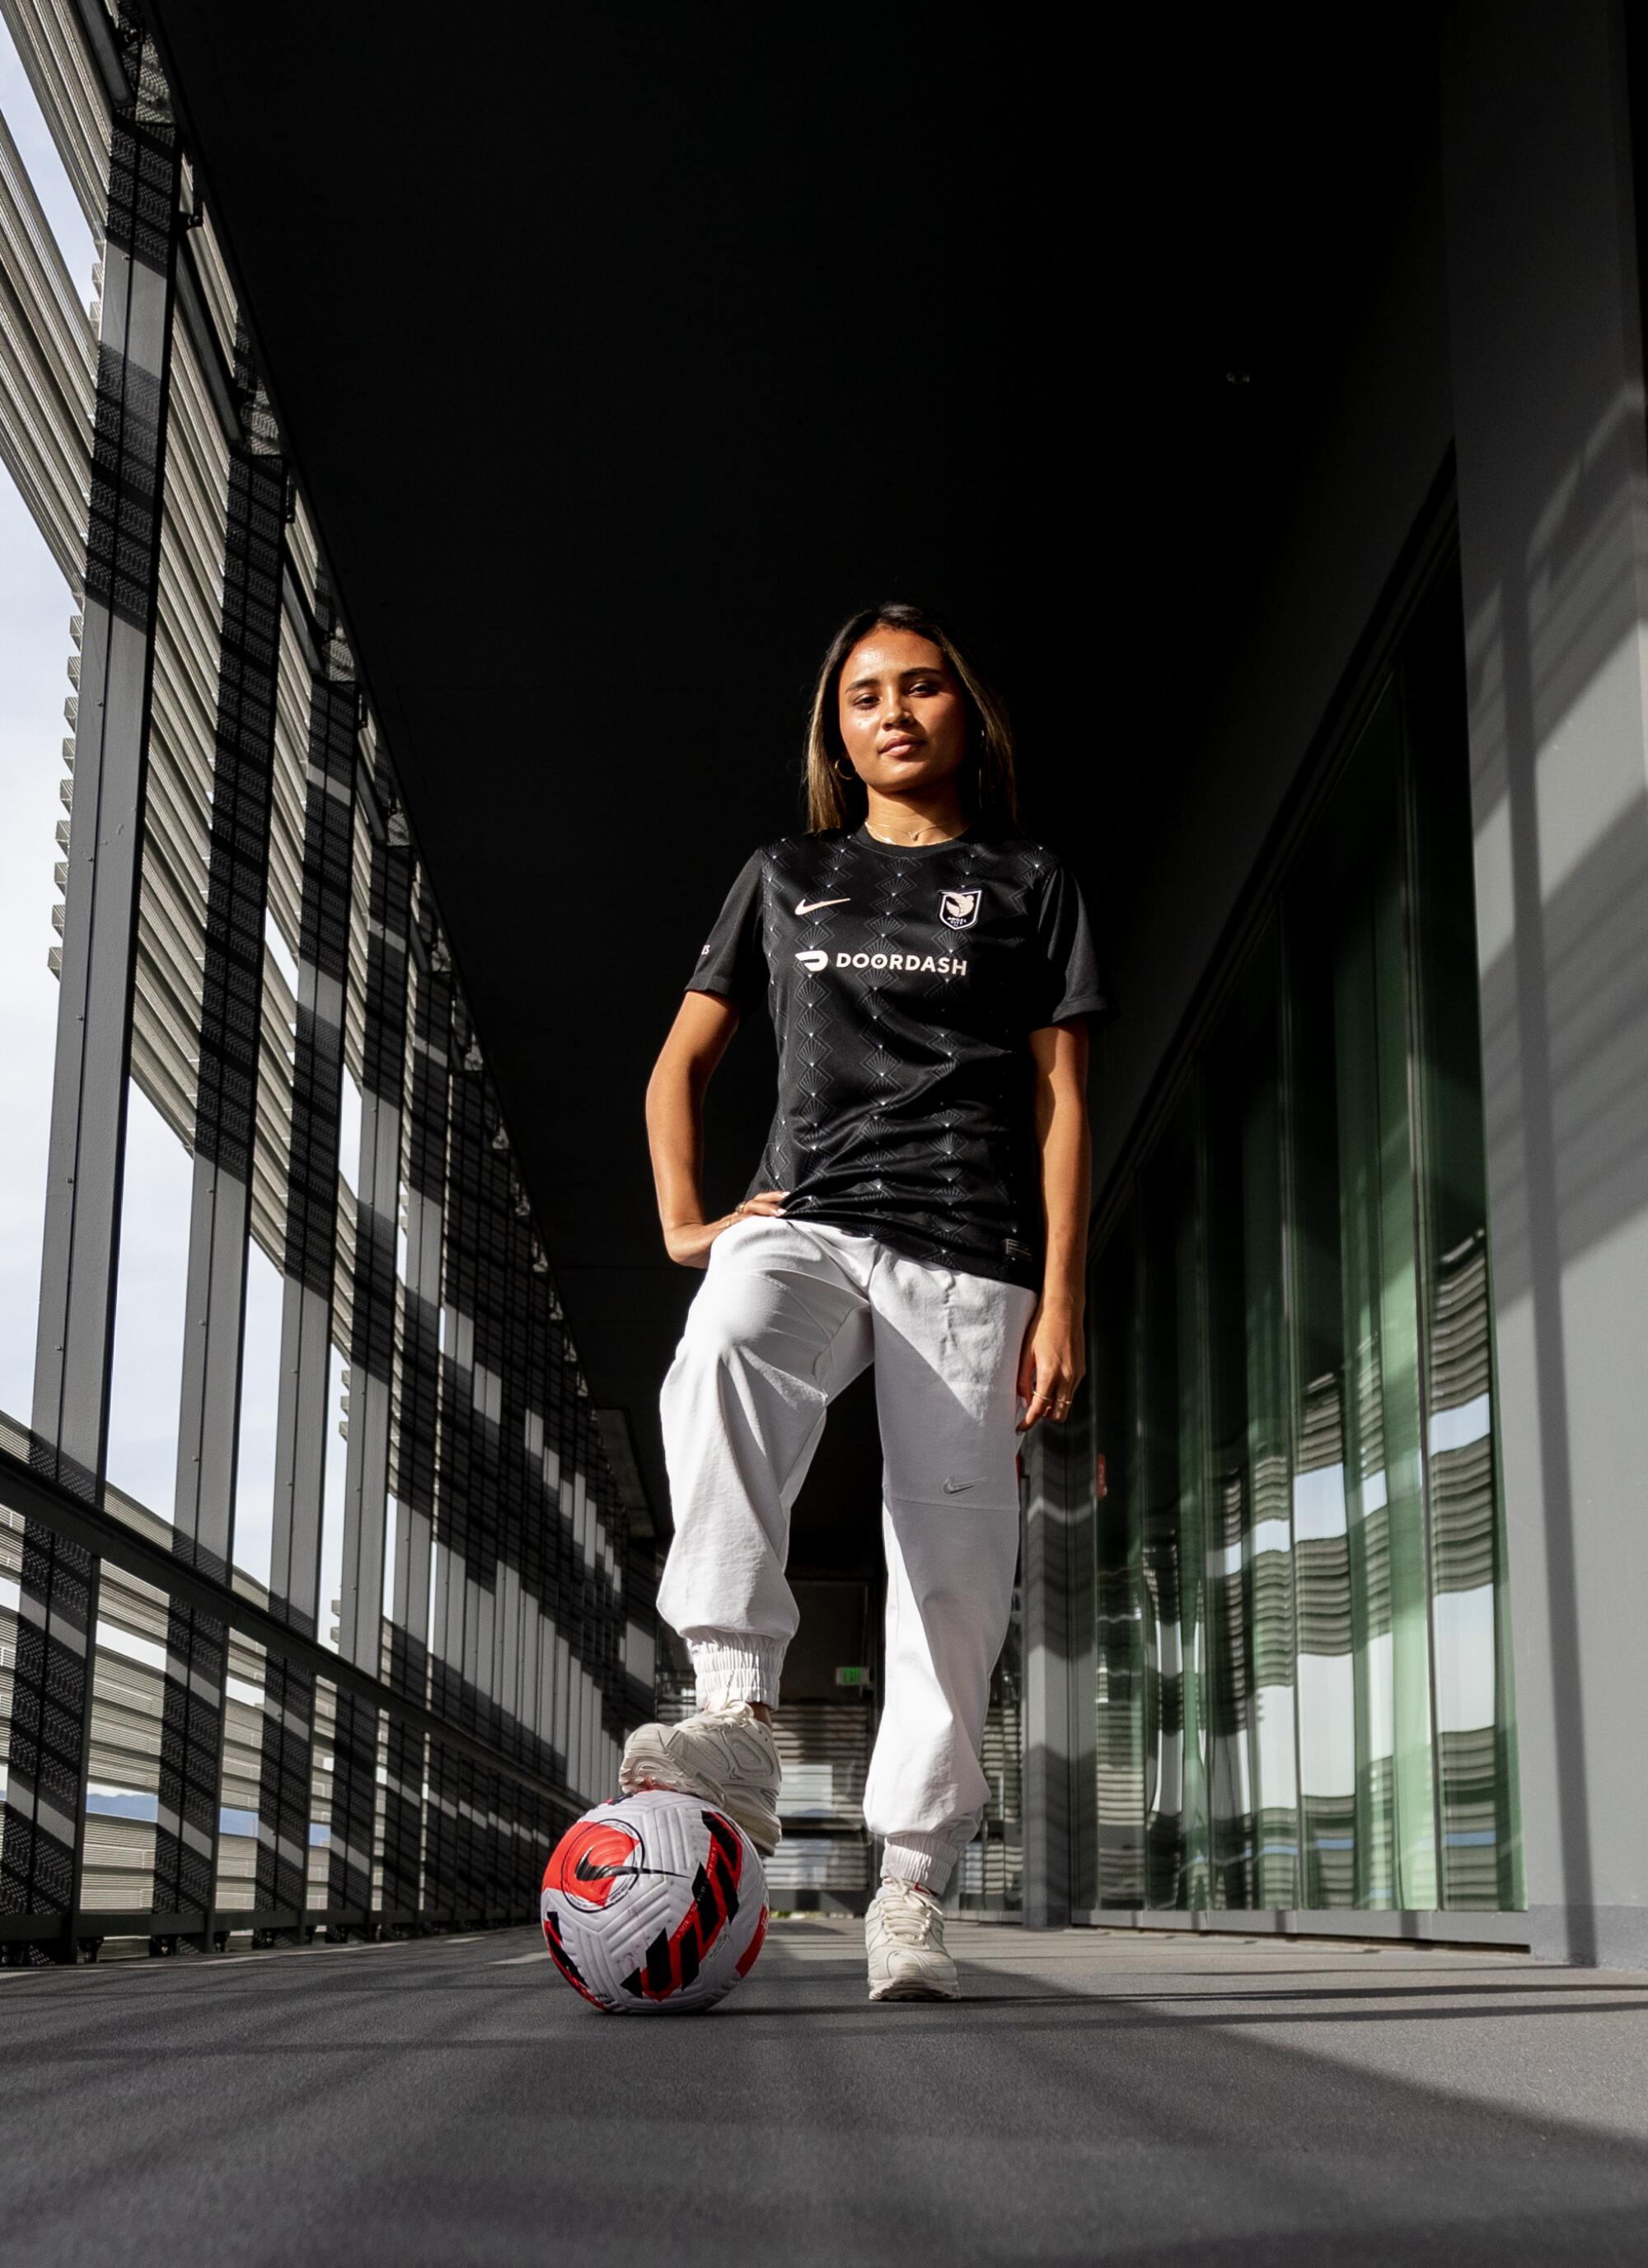 Alyssa Thompson stands in a hallway with her foot on a soccer ball.